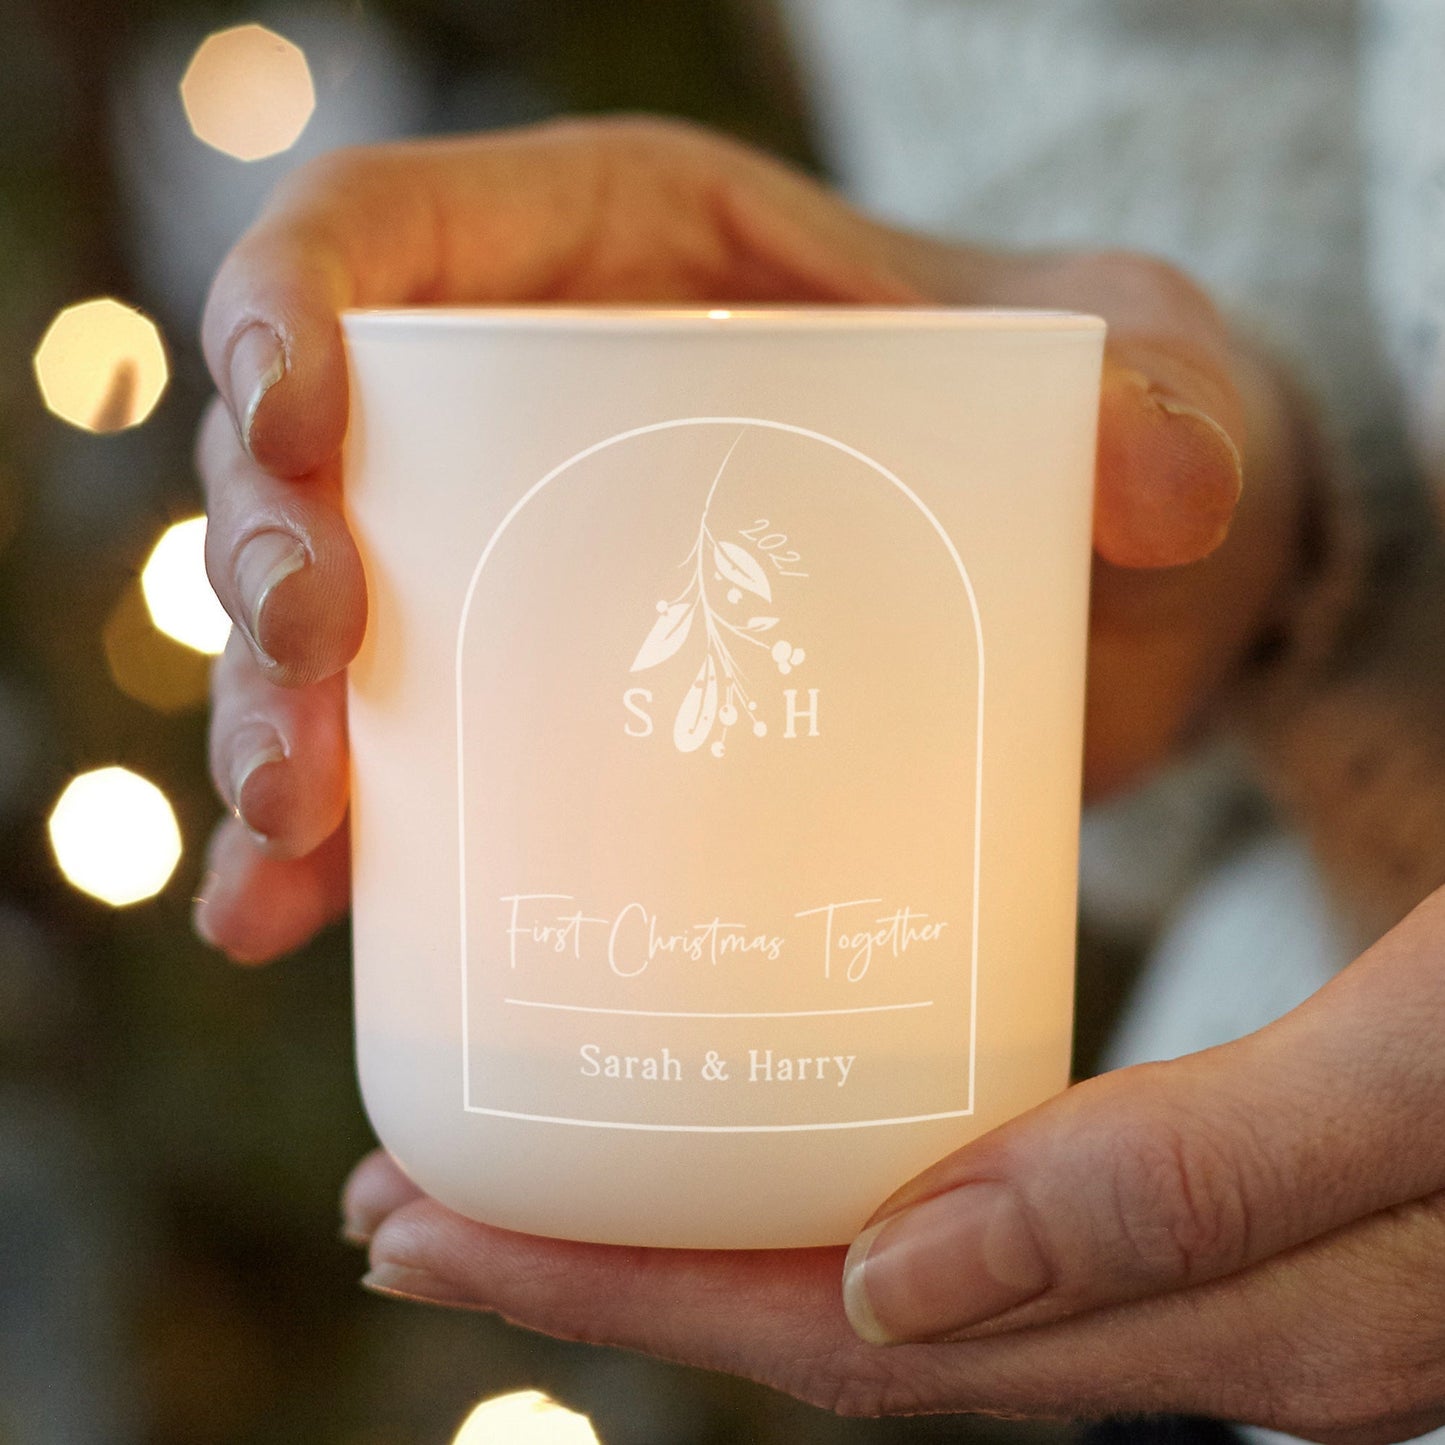 First Christmas Together Gift Personalised Tealight Holder with Candles - Kindred Fires